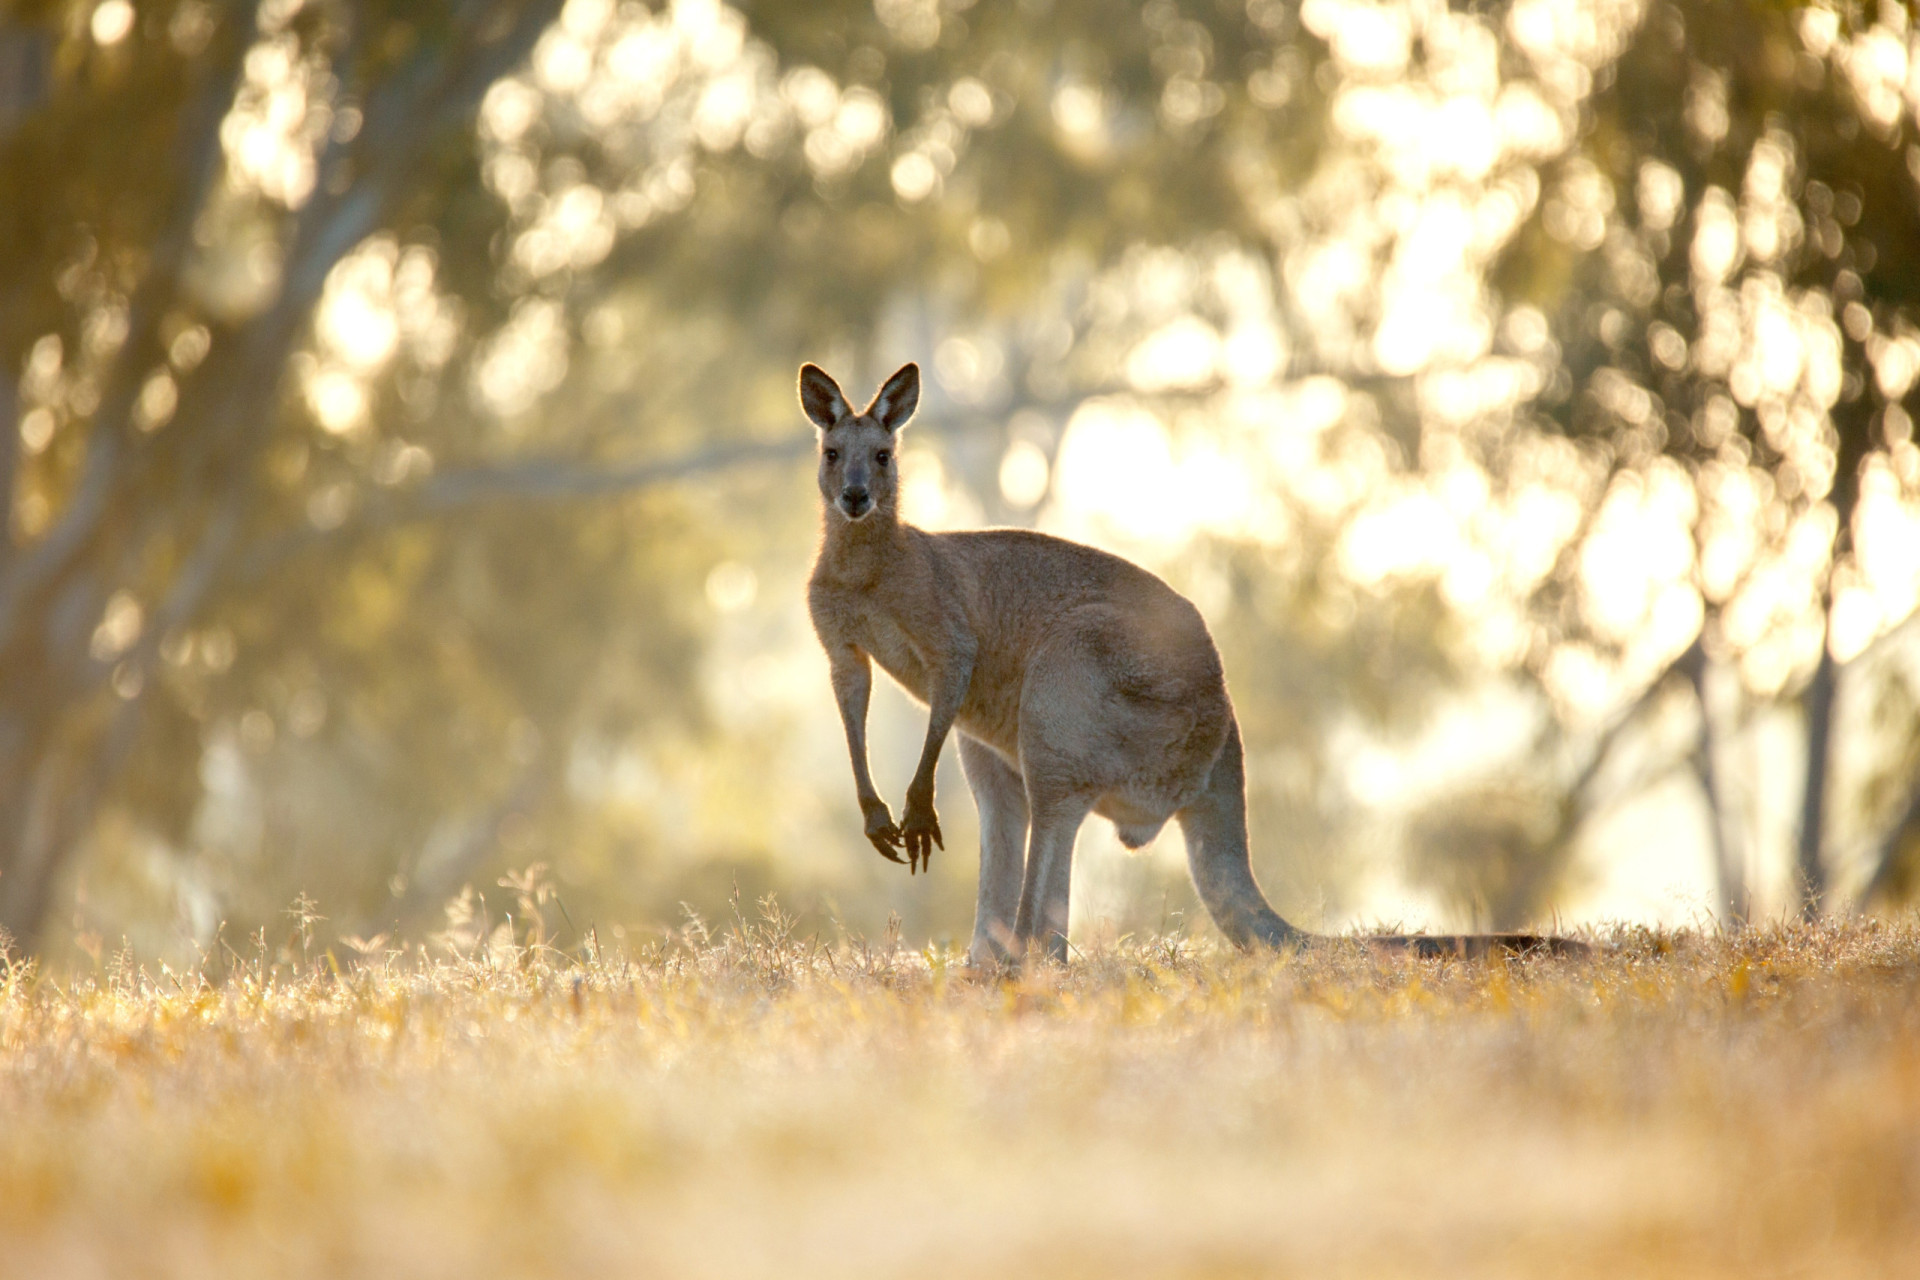 <p>Many native animal names come from Aboriginal languages, including kangaroo, koala, wombat, and kookaburra.</p><p><a href="https://www.msn.com/en-us/community/channel/vid-7xx8mnucu55yw63we9va2gwr7uihbxwc68fxqp25x6tg4ftibpra?cvid=94631541bc0f4f89bfd59158d696ad7e">Follow us and access great exclusive content every day</a></p>